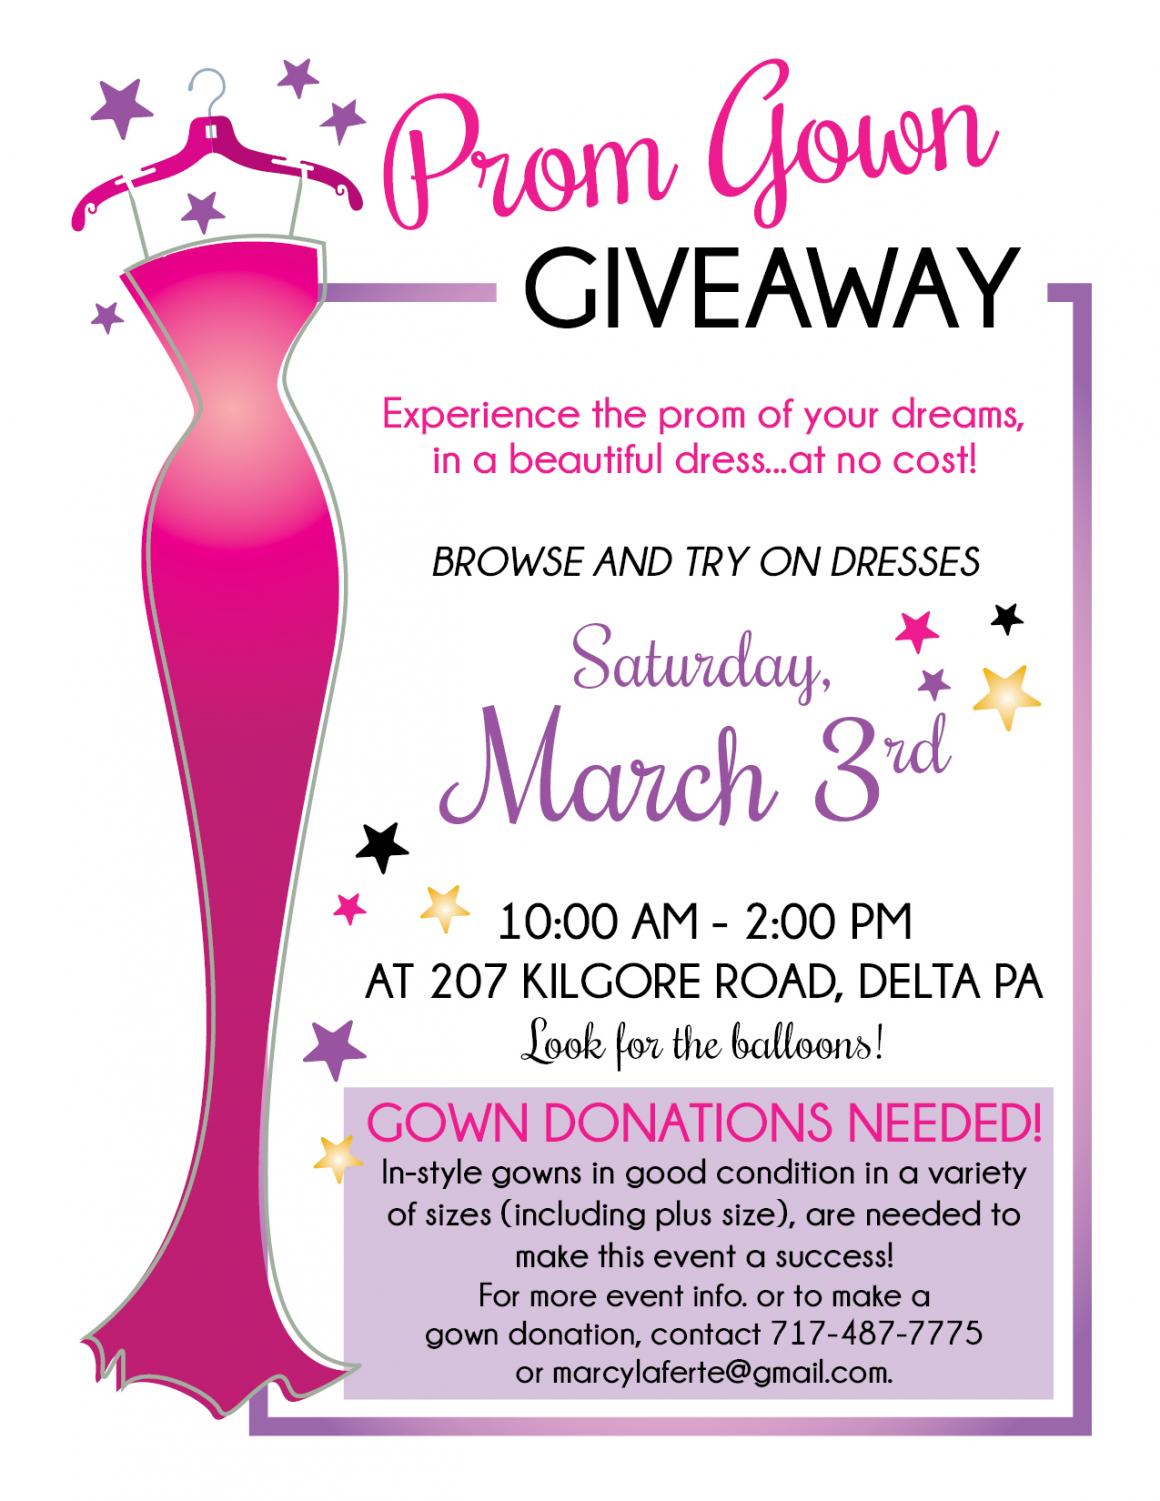 Prom is Quickly Approaching, Community Wants to Provide Free Dresses ...